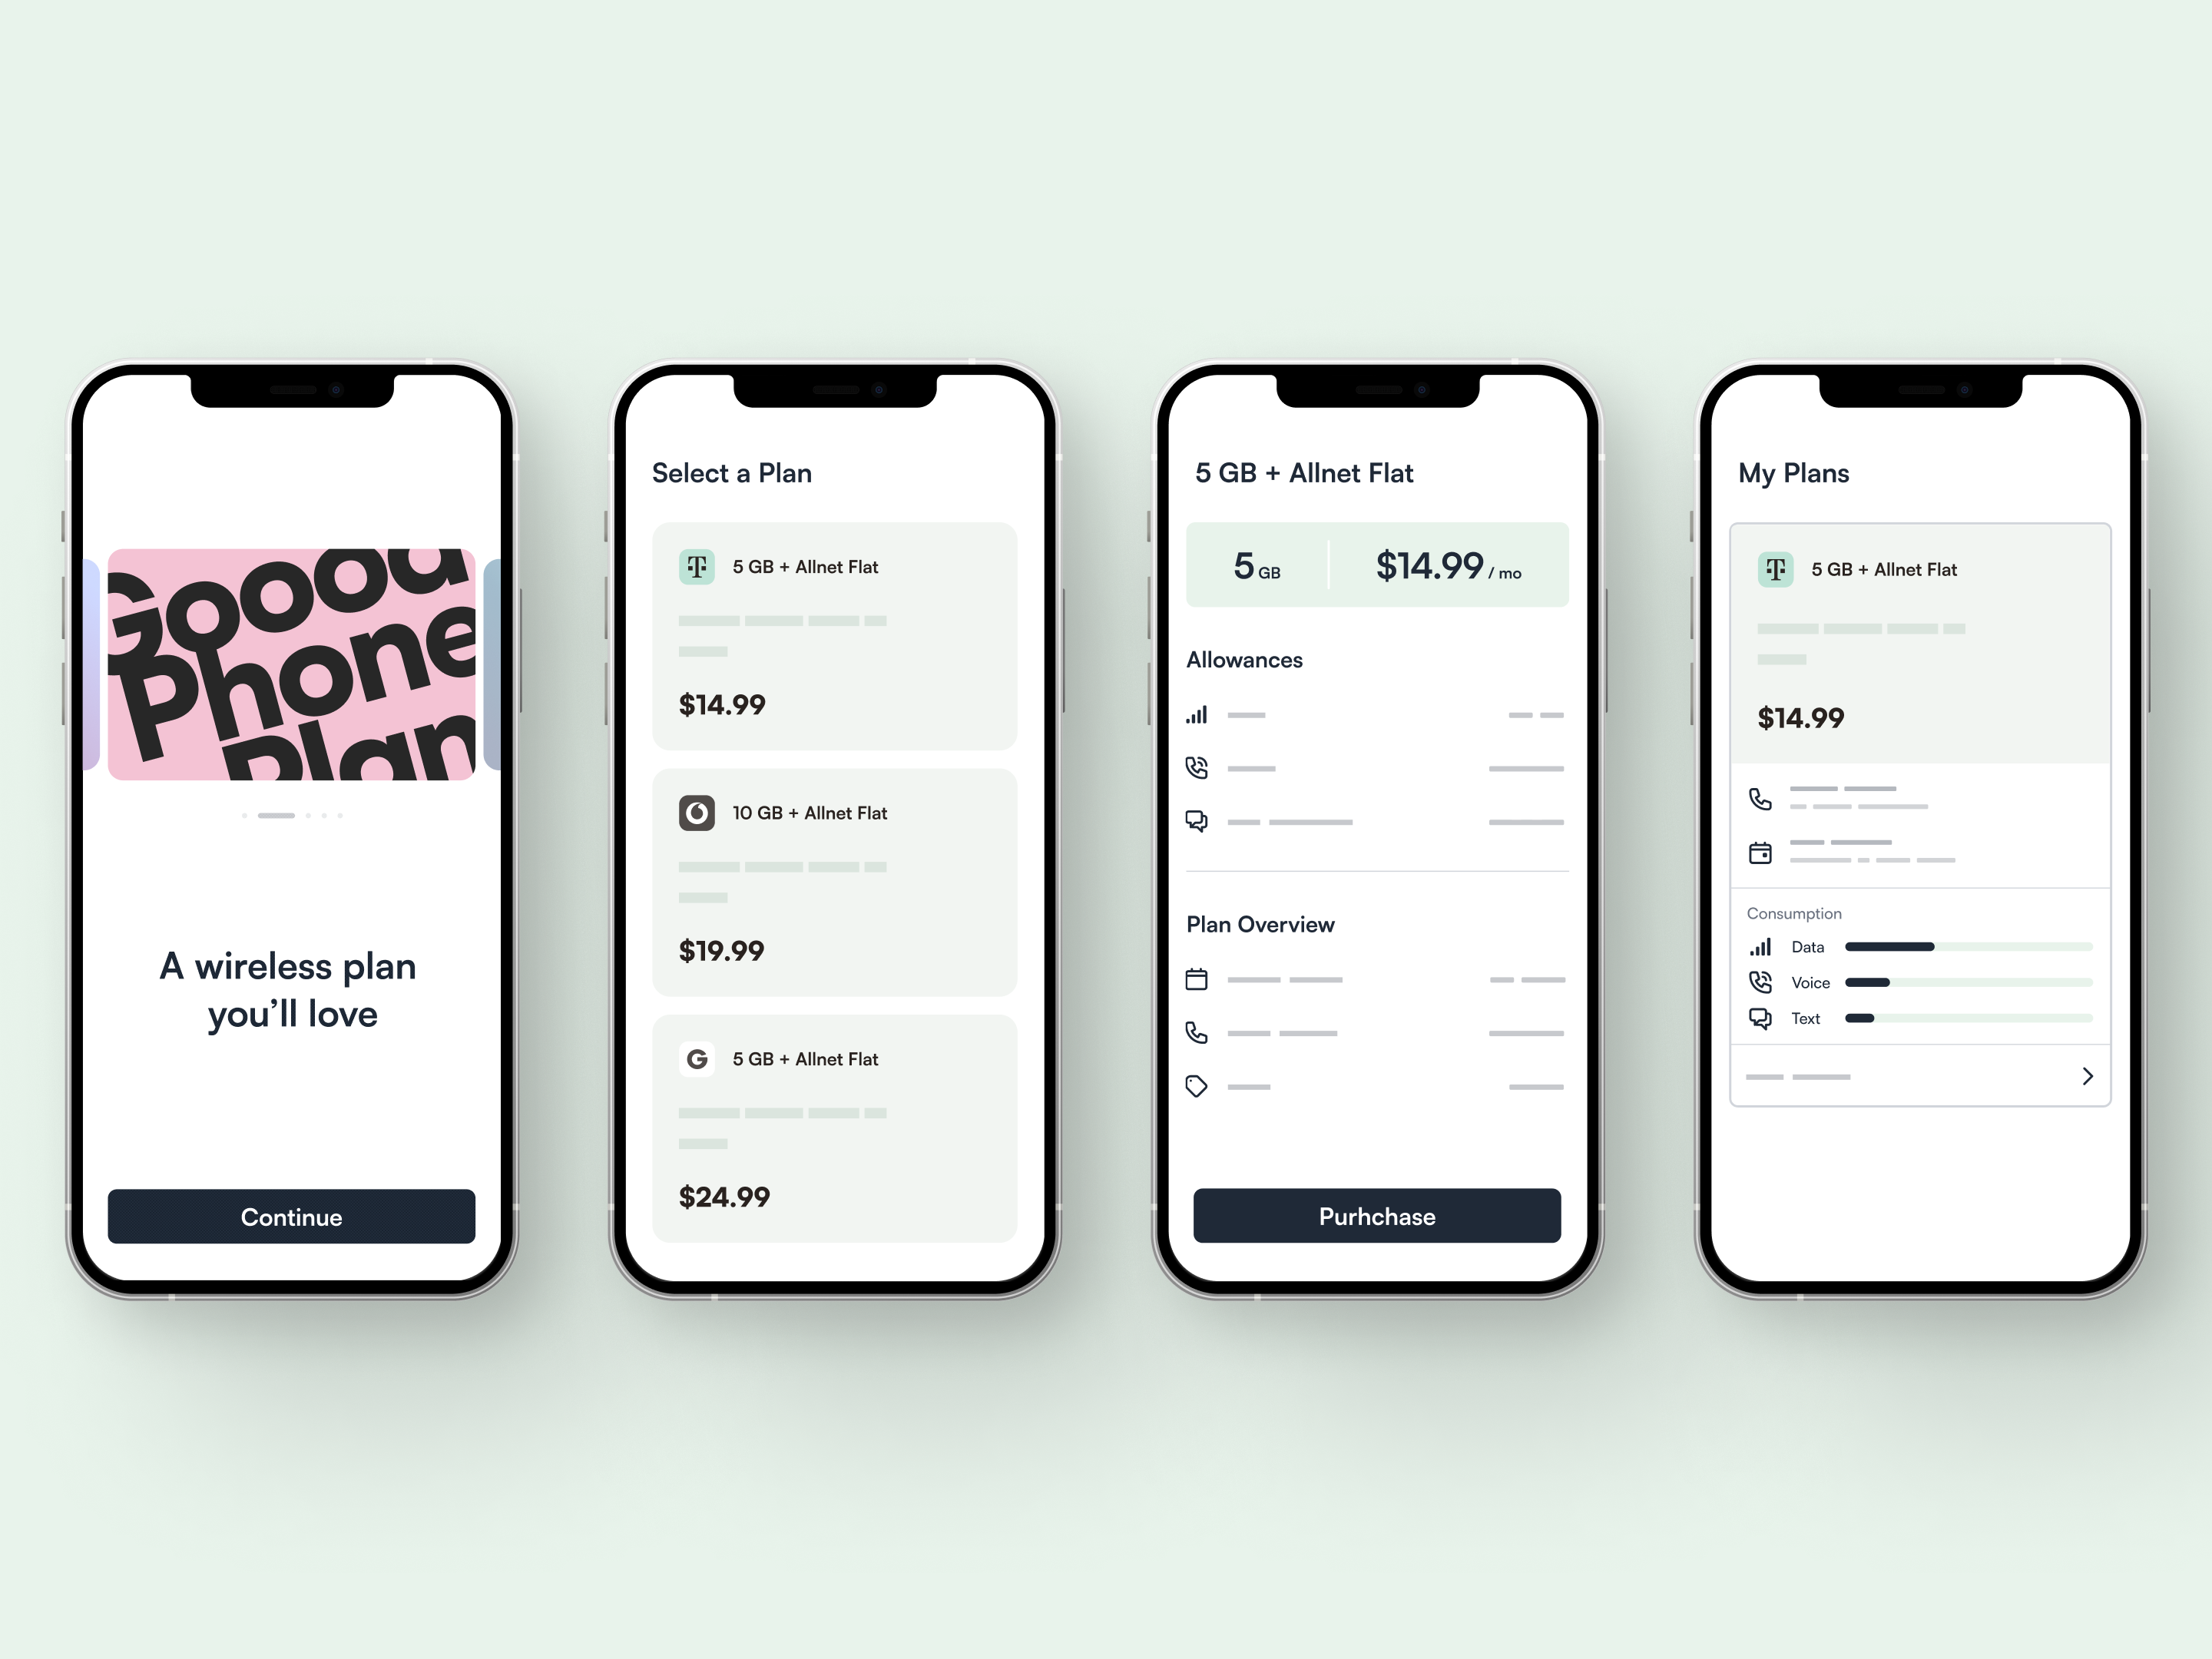 Gigs Connect is a hosted checkout optimized for high end-user conversion. With Gigs Connect at checkout, companies can offer their own plans in line with their existing products. Requiring just a simple copy-paste, Gigs is easy to embed into any webshop.